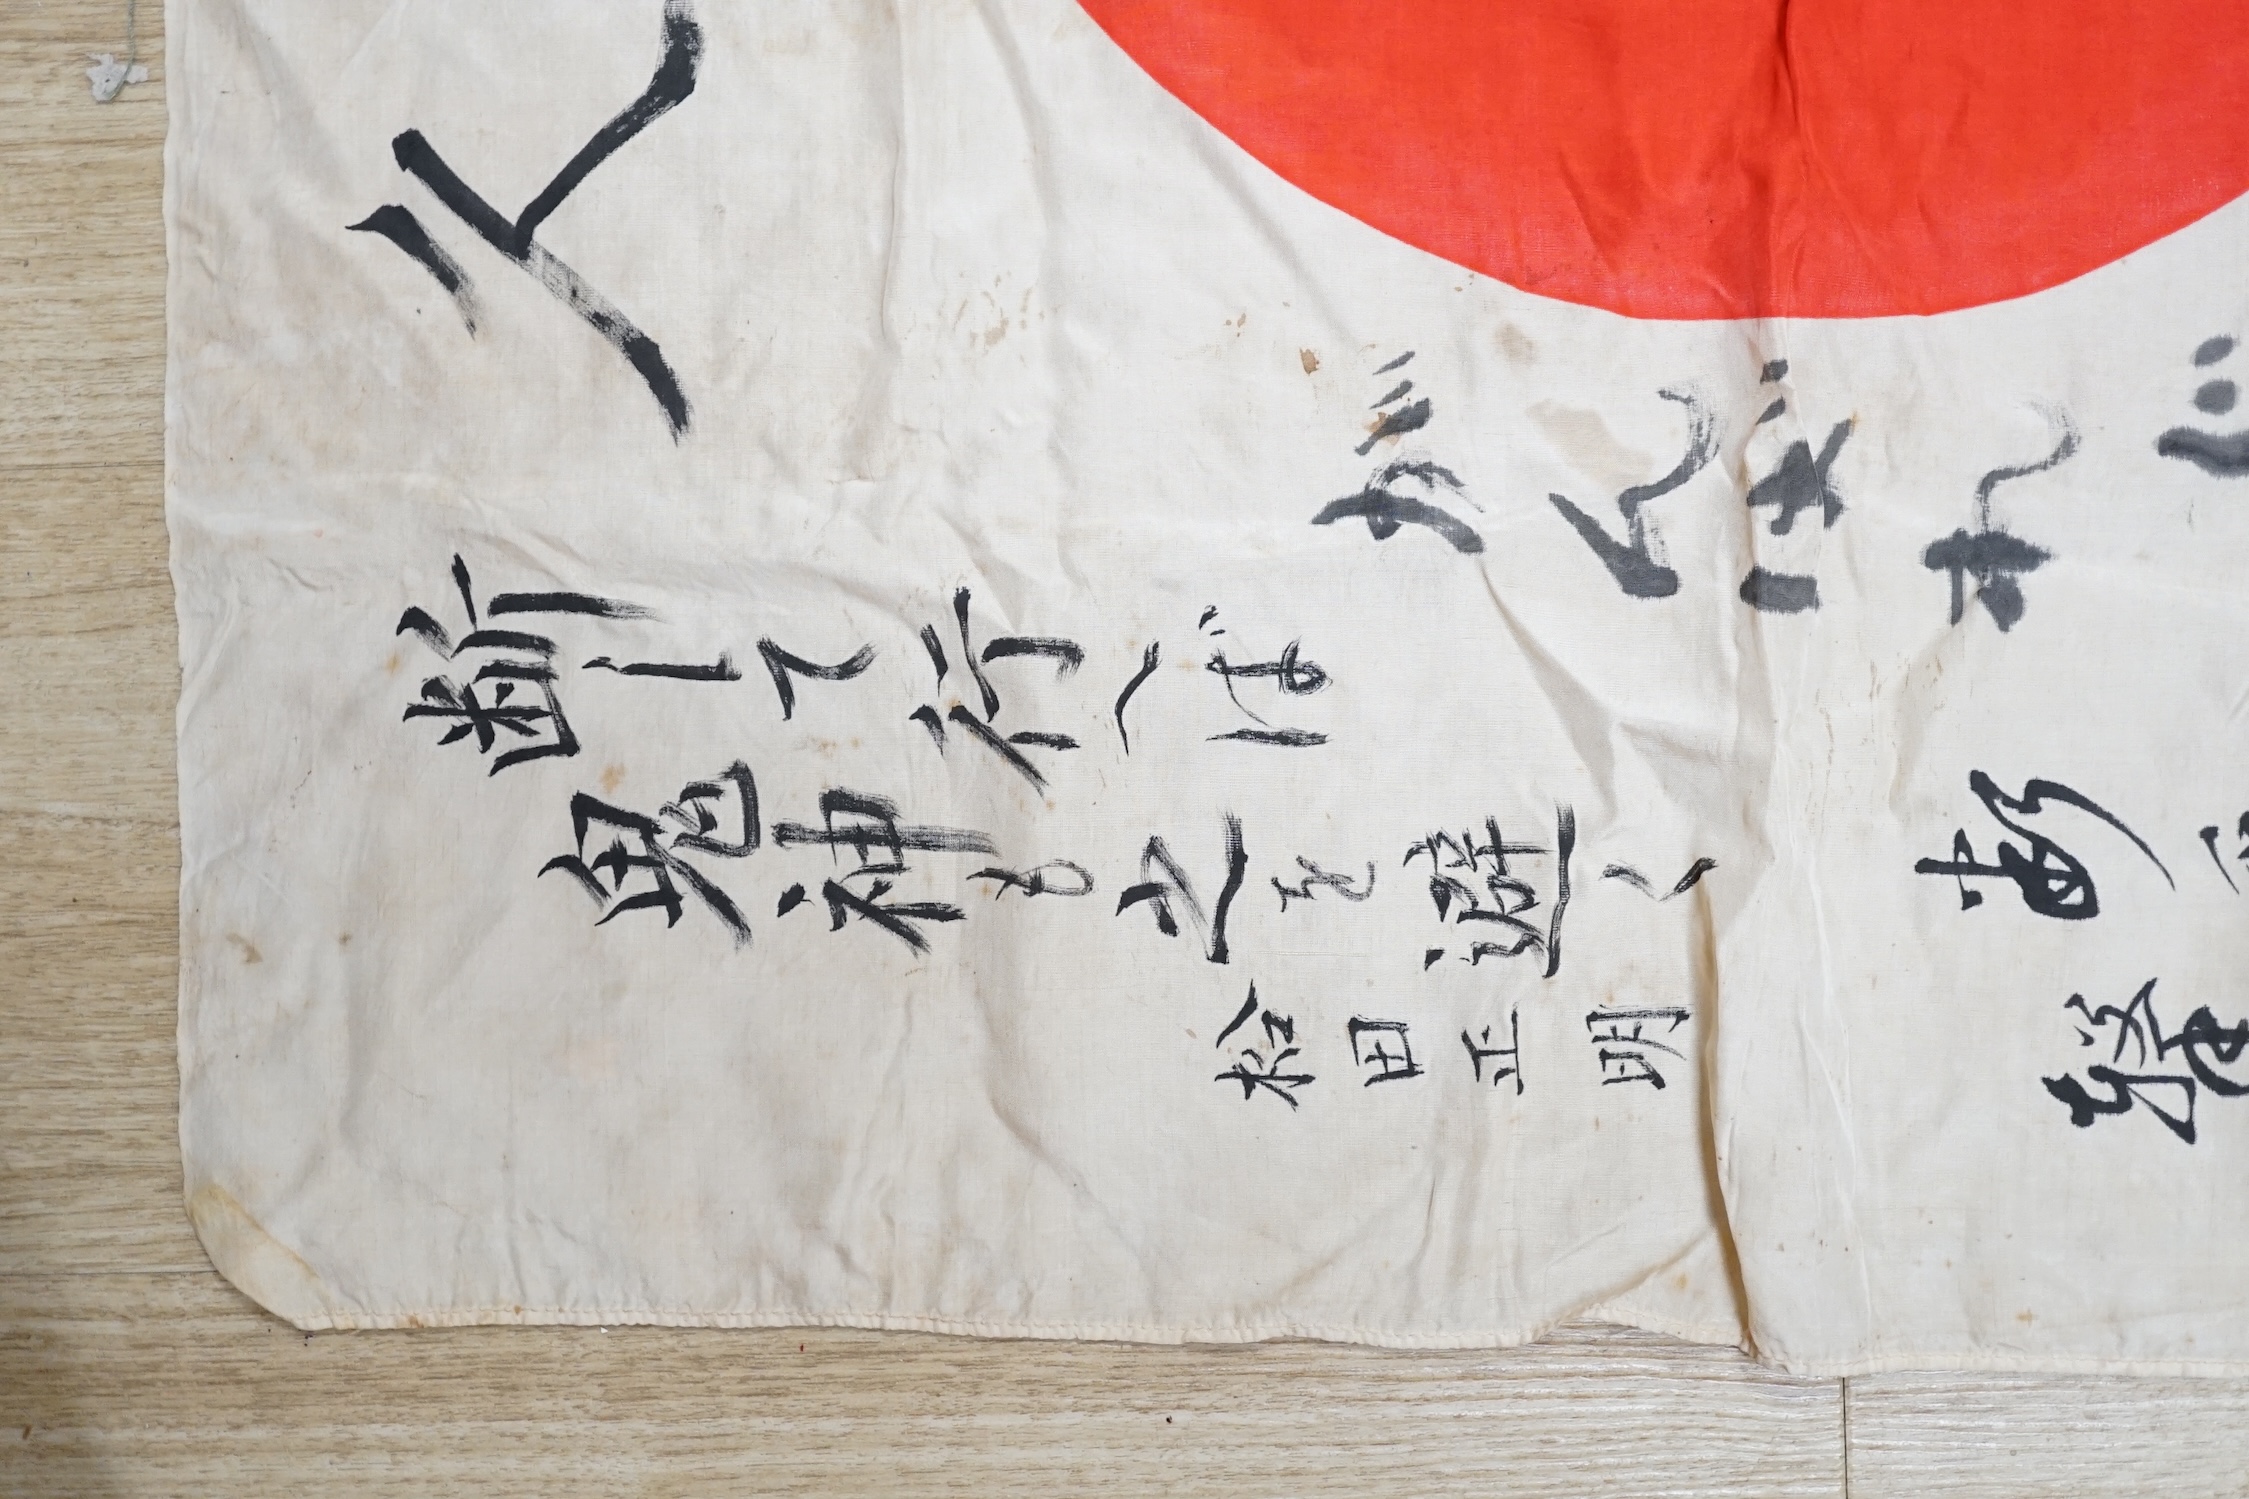 A WWII Japanese signed silk prayer flag, 83 x 73cm. Condition - fair, significant staining in some areas